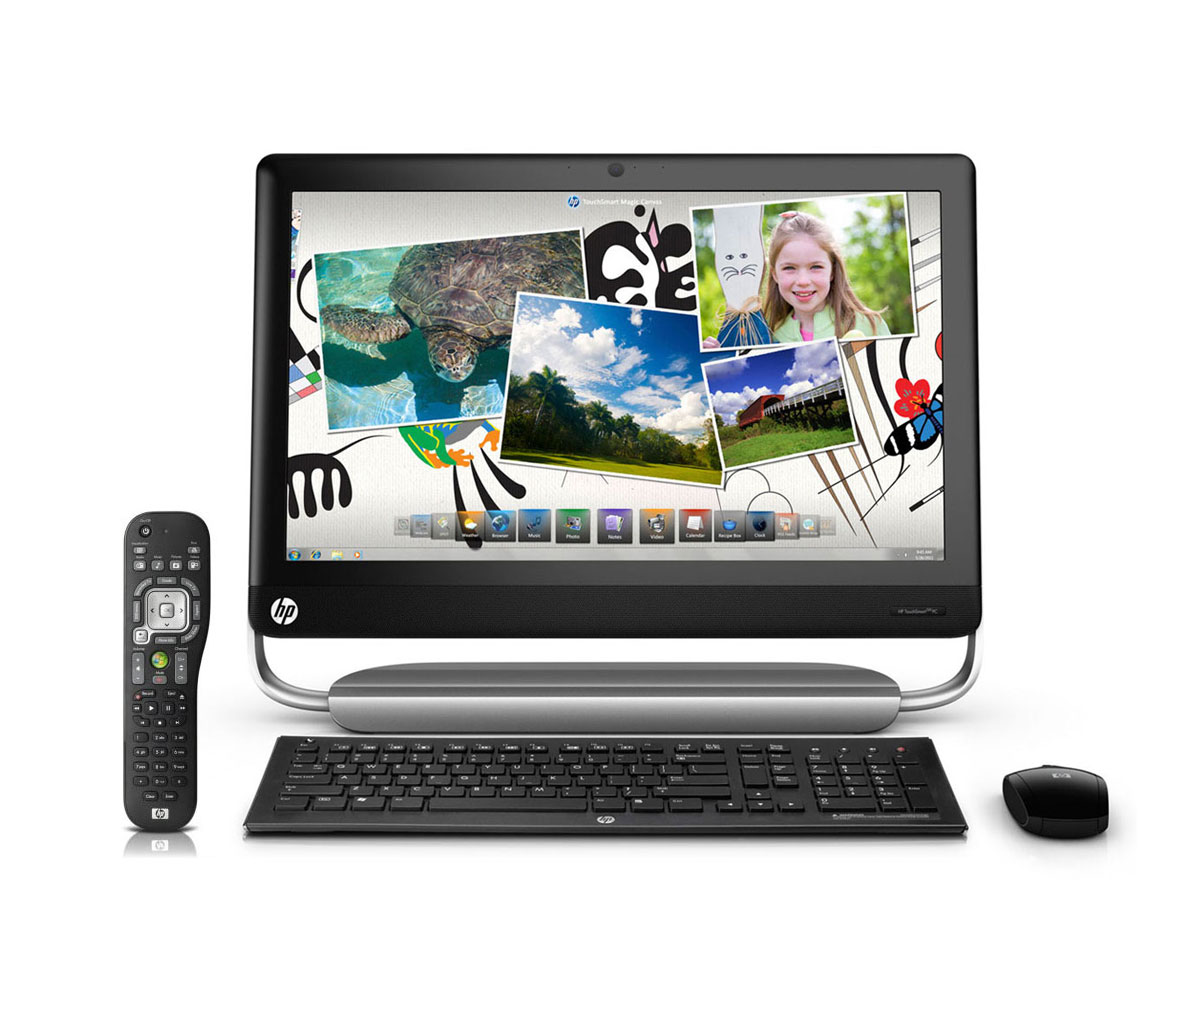 HP TouchSmart 520-1050 PC Front View